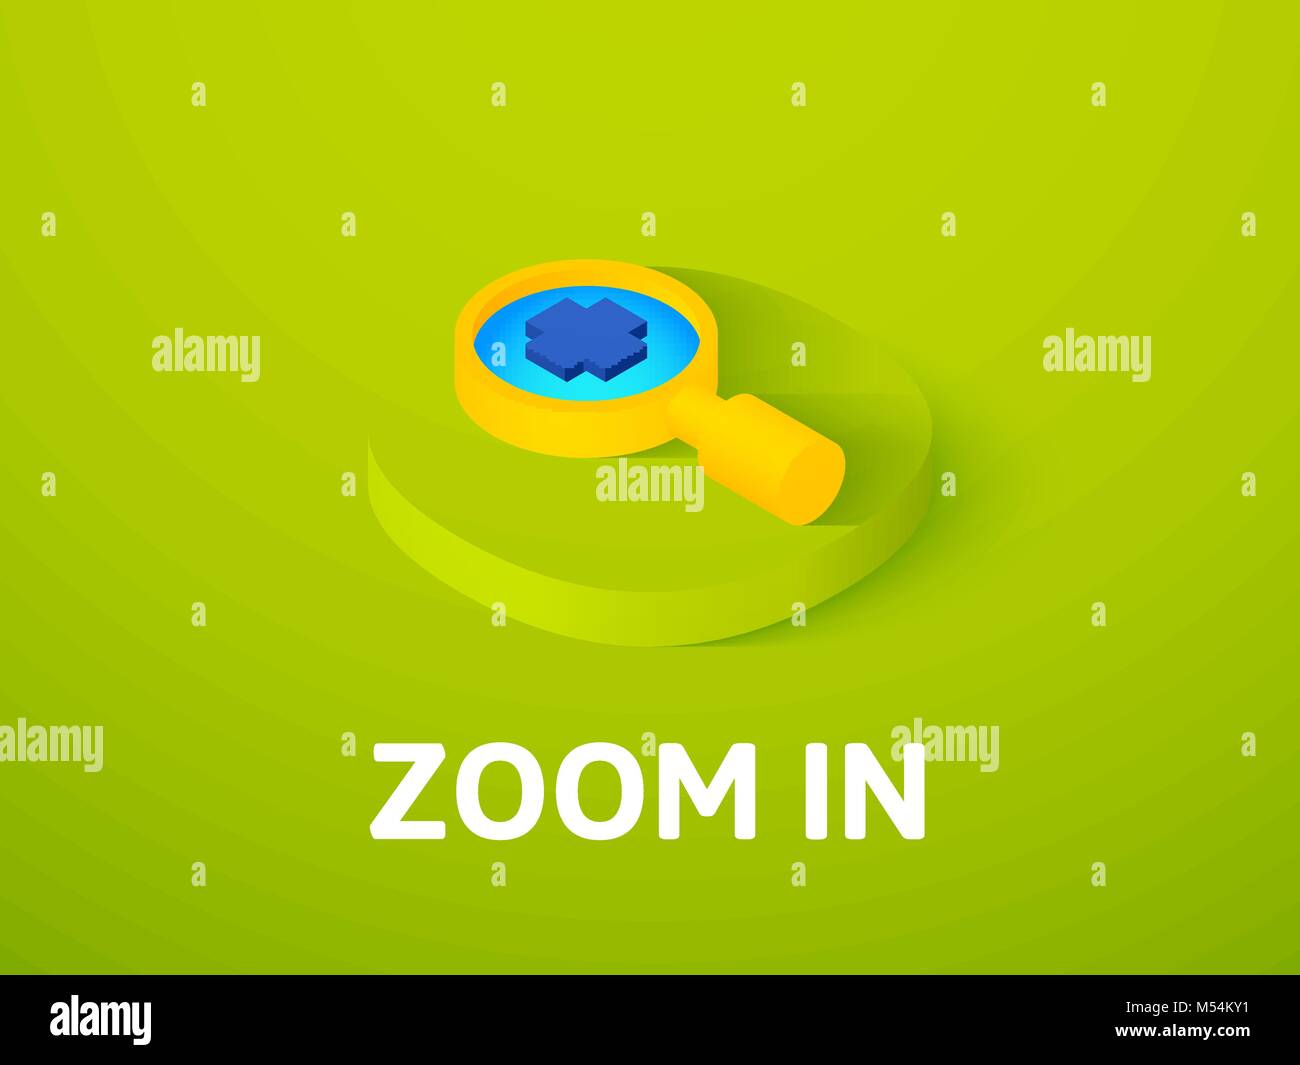 Zoom in isometric icon, isolated on color background Stock Vector